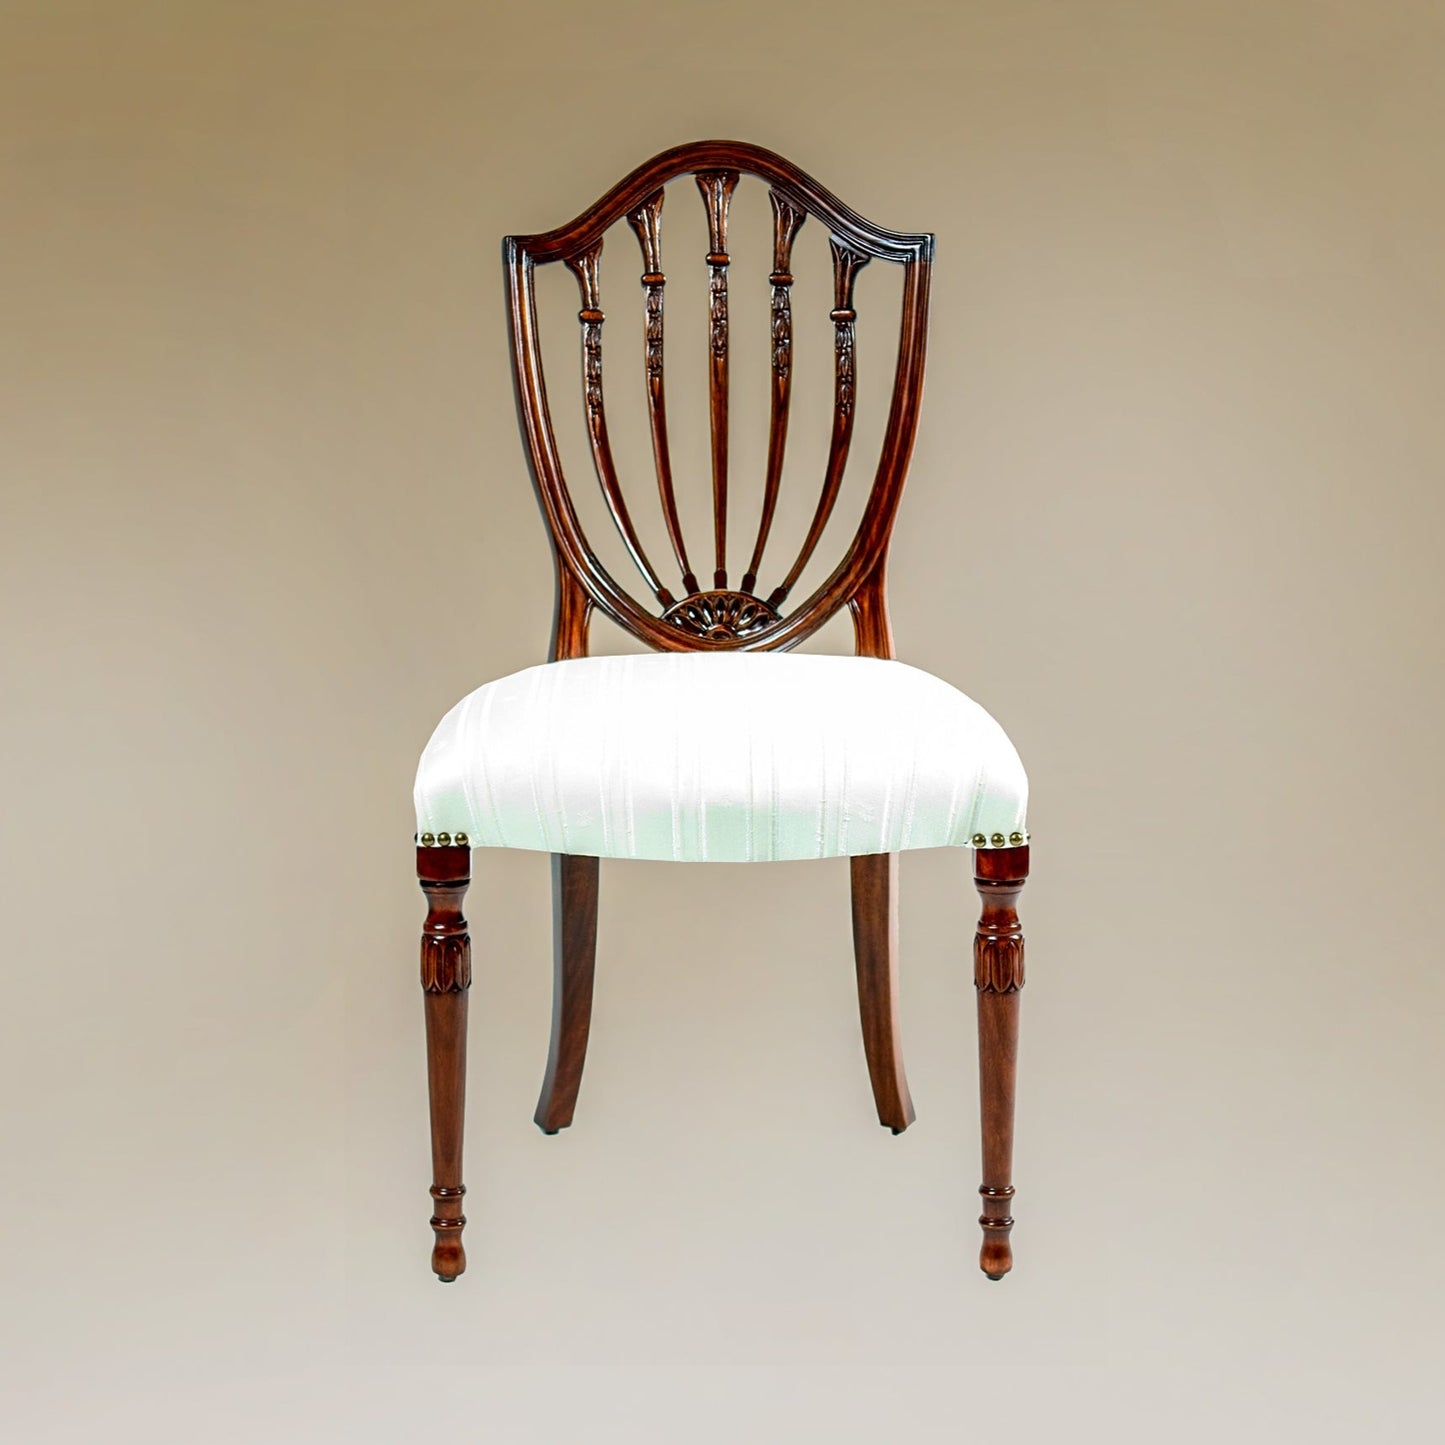 PRINCE OF WALES SIDE CHAIR